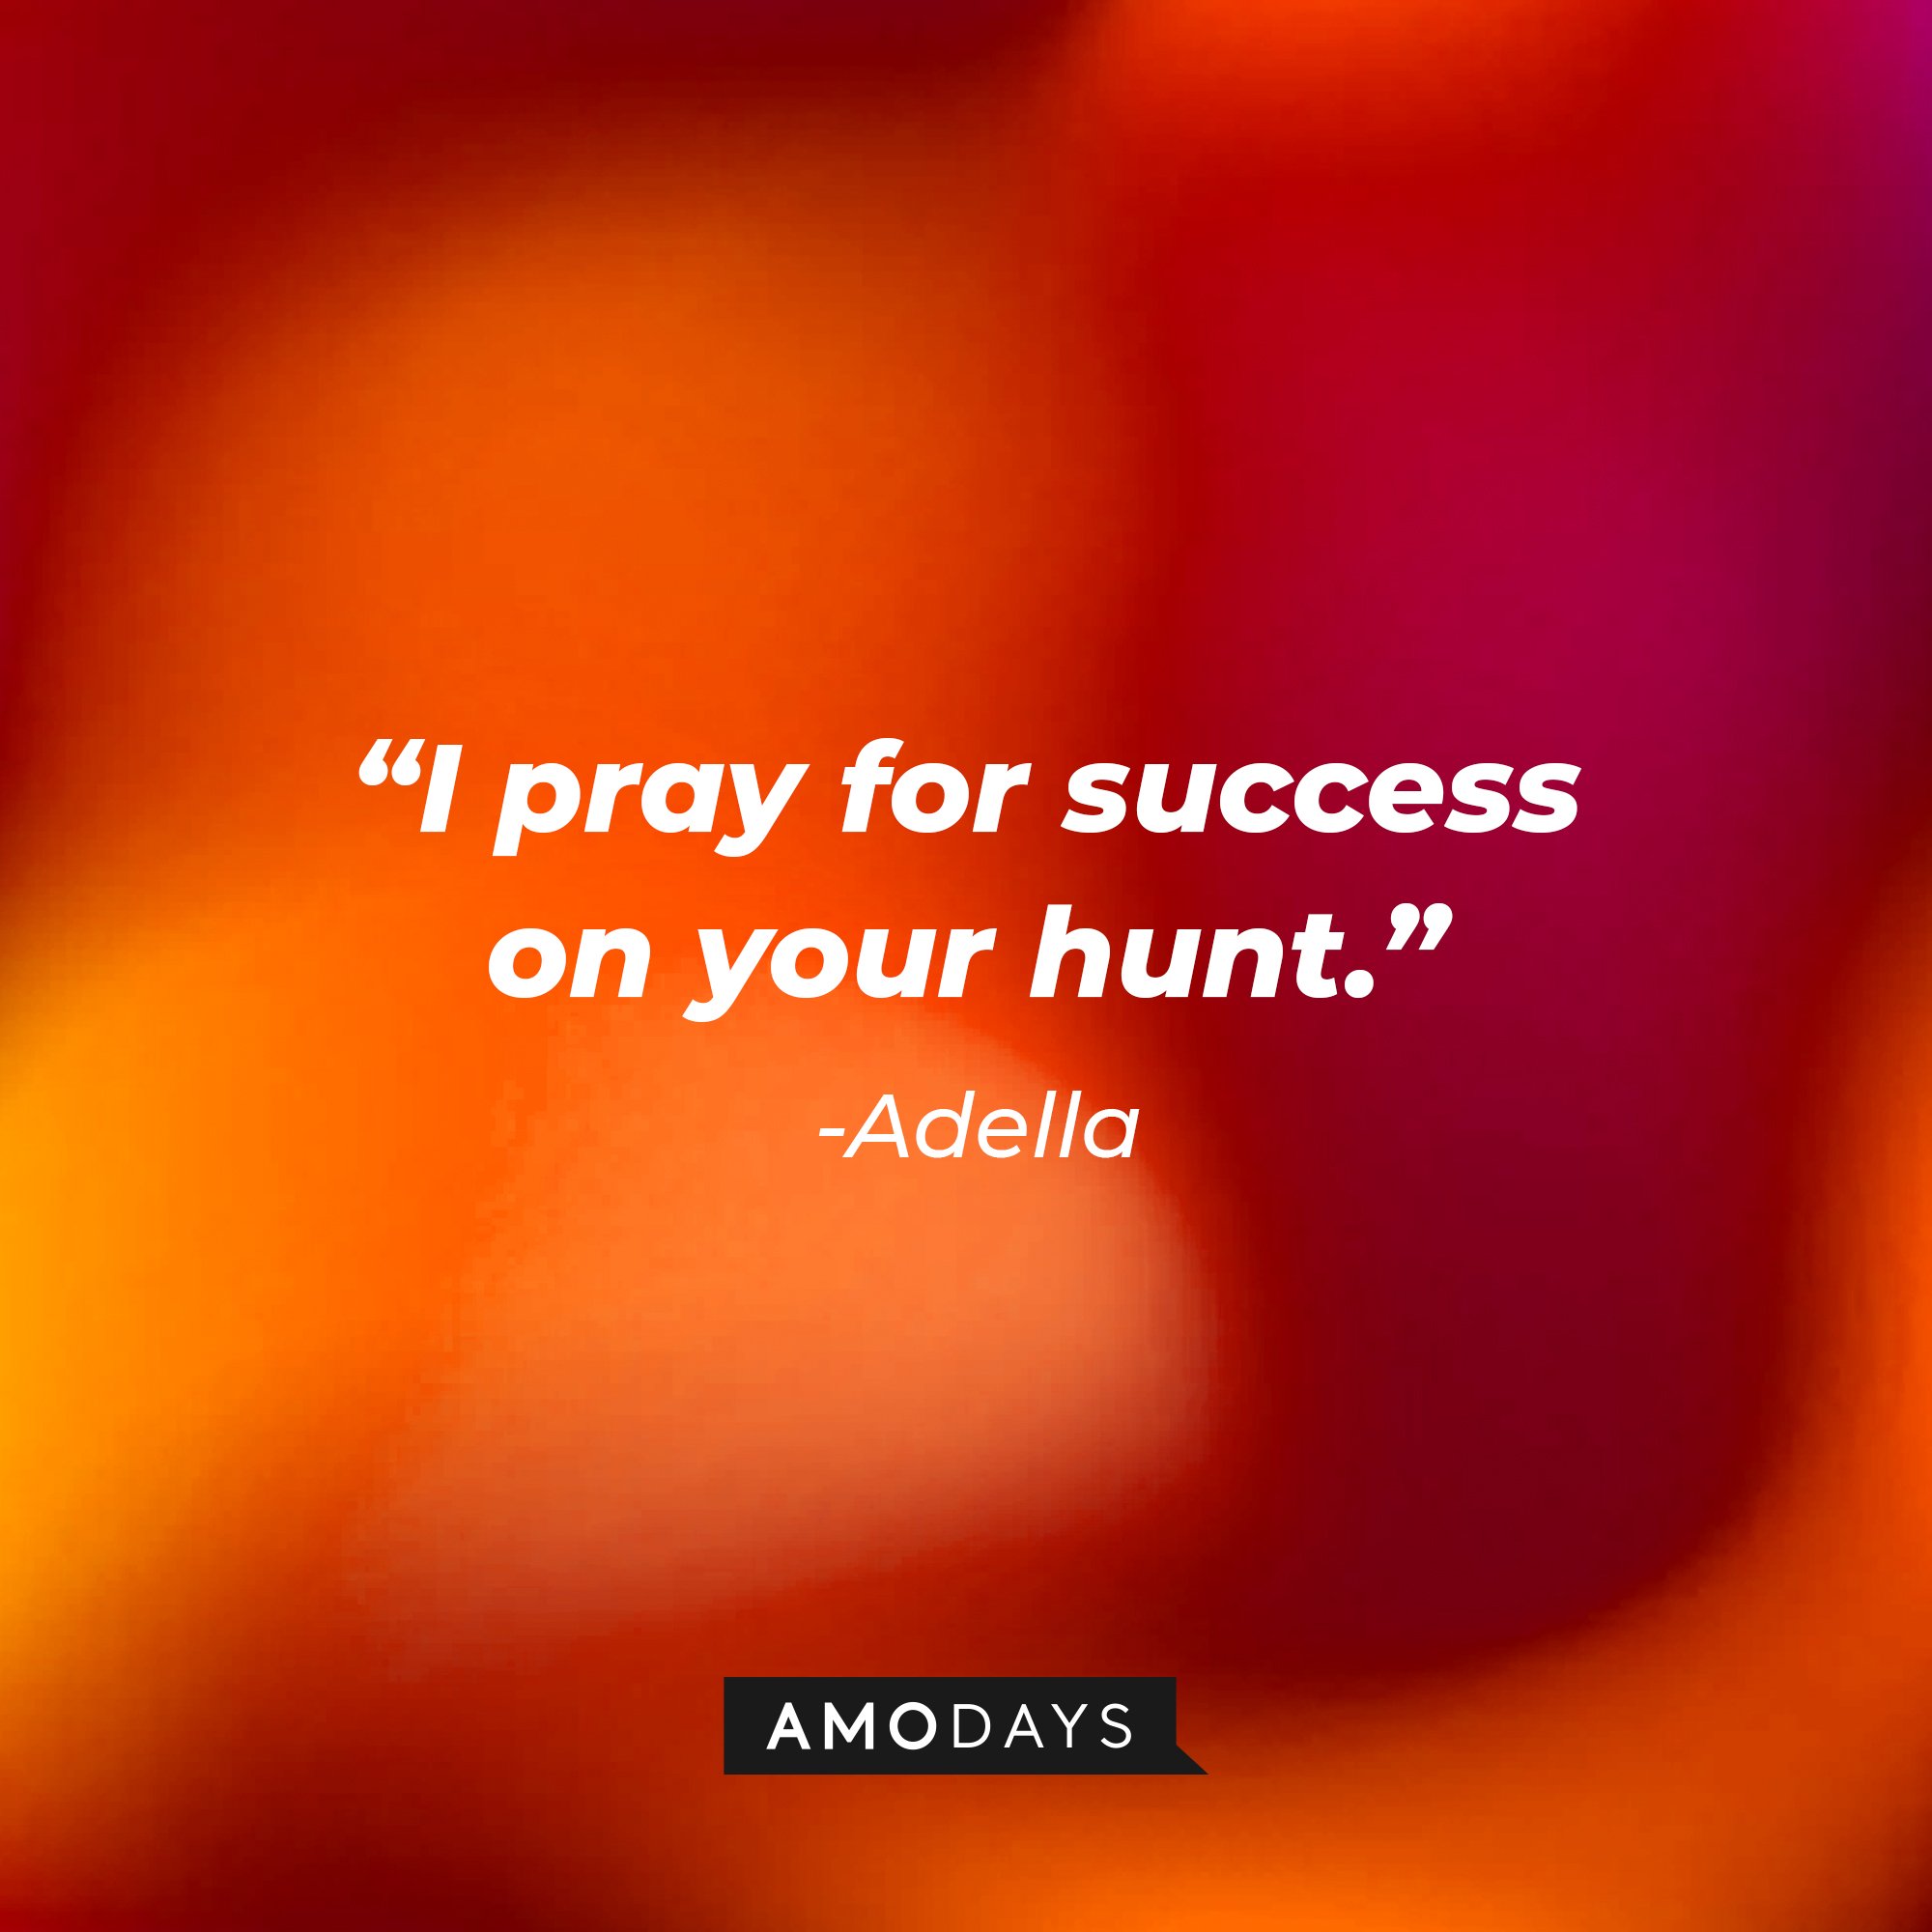 Adella’s quote: "I pray for success on your hunt." | Image: AmoDays